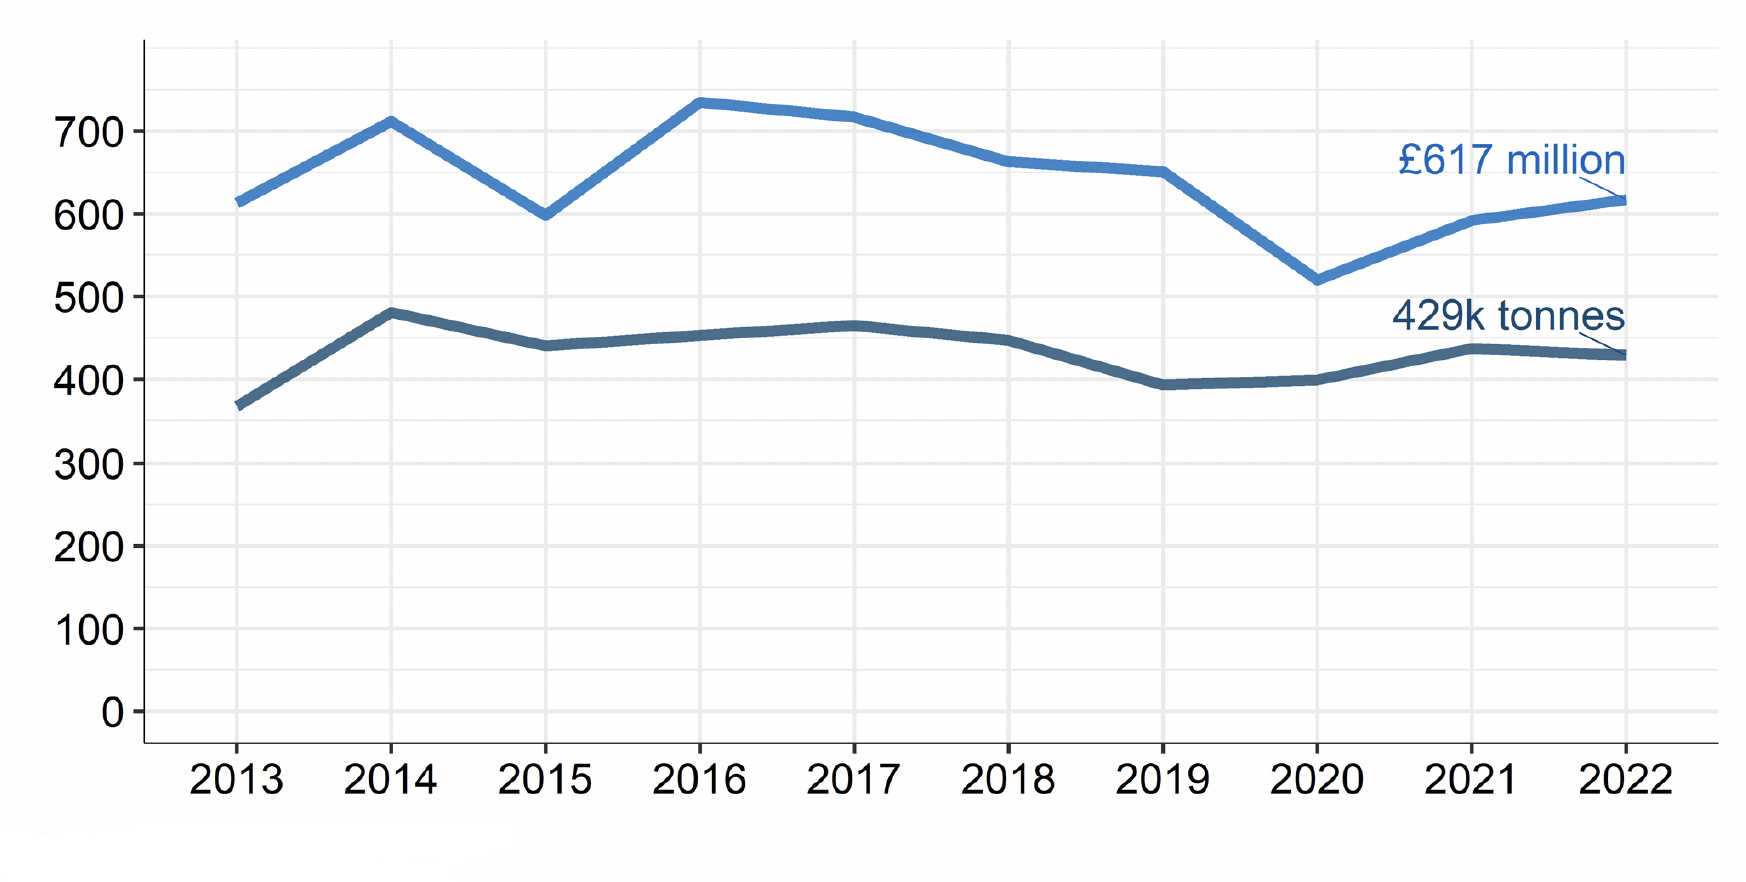 A graph showing the trends in the tonnage and value of all fish and sea fish landings by Scottish vessels from 2013 to 2022. The graph shows that the real value of fish landed by Scottish vessels has decreased from a high of £735 million in 2016, to a low of £520 million in 2020. The value has since increased to £617 million in 2022.